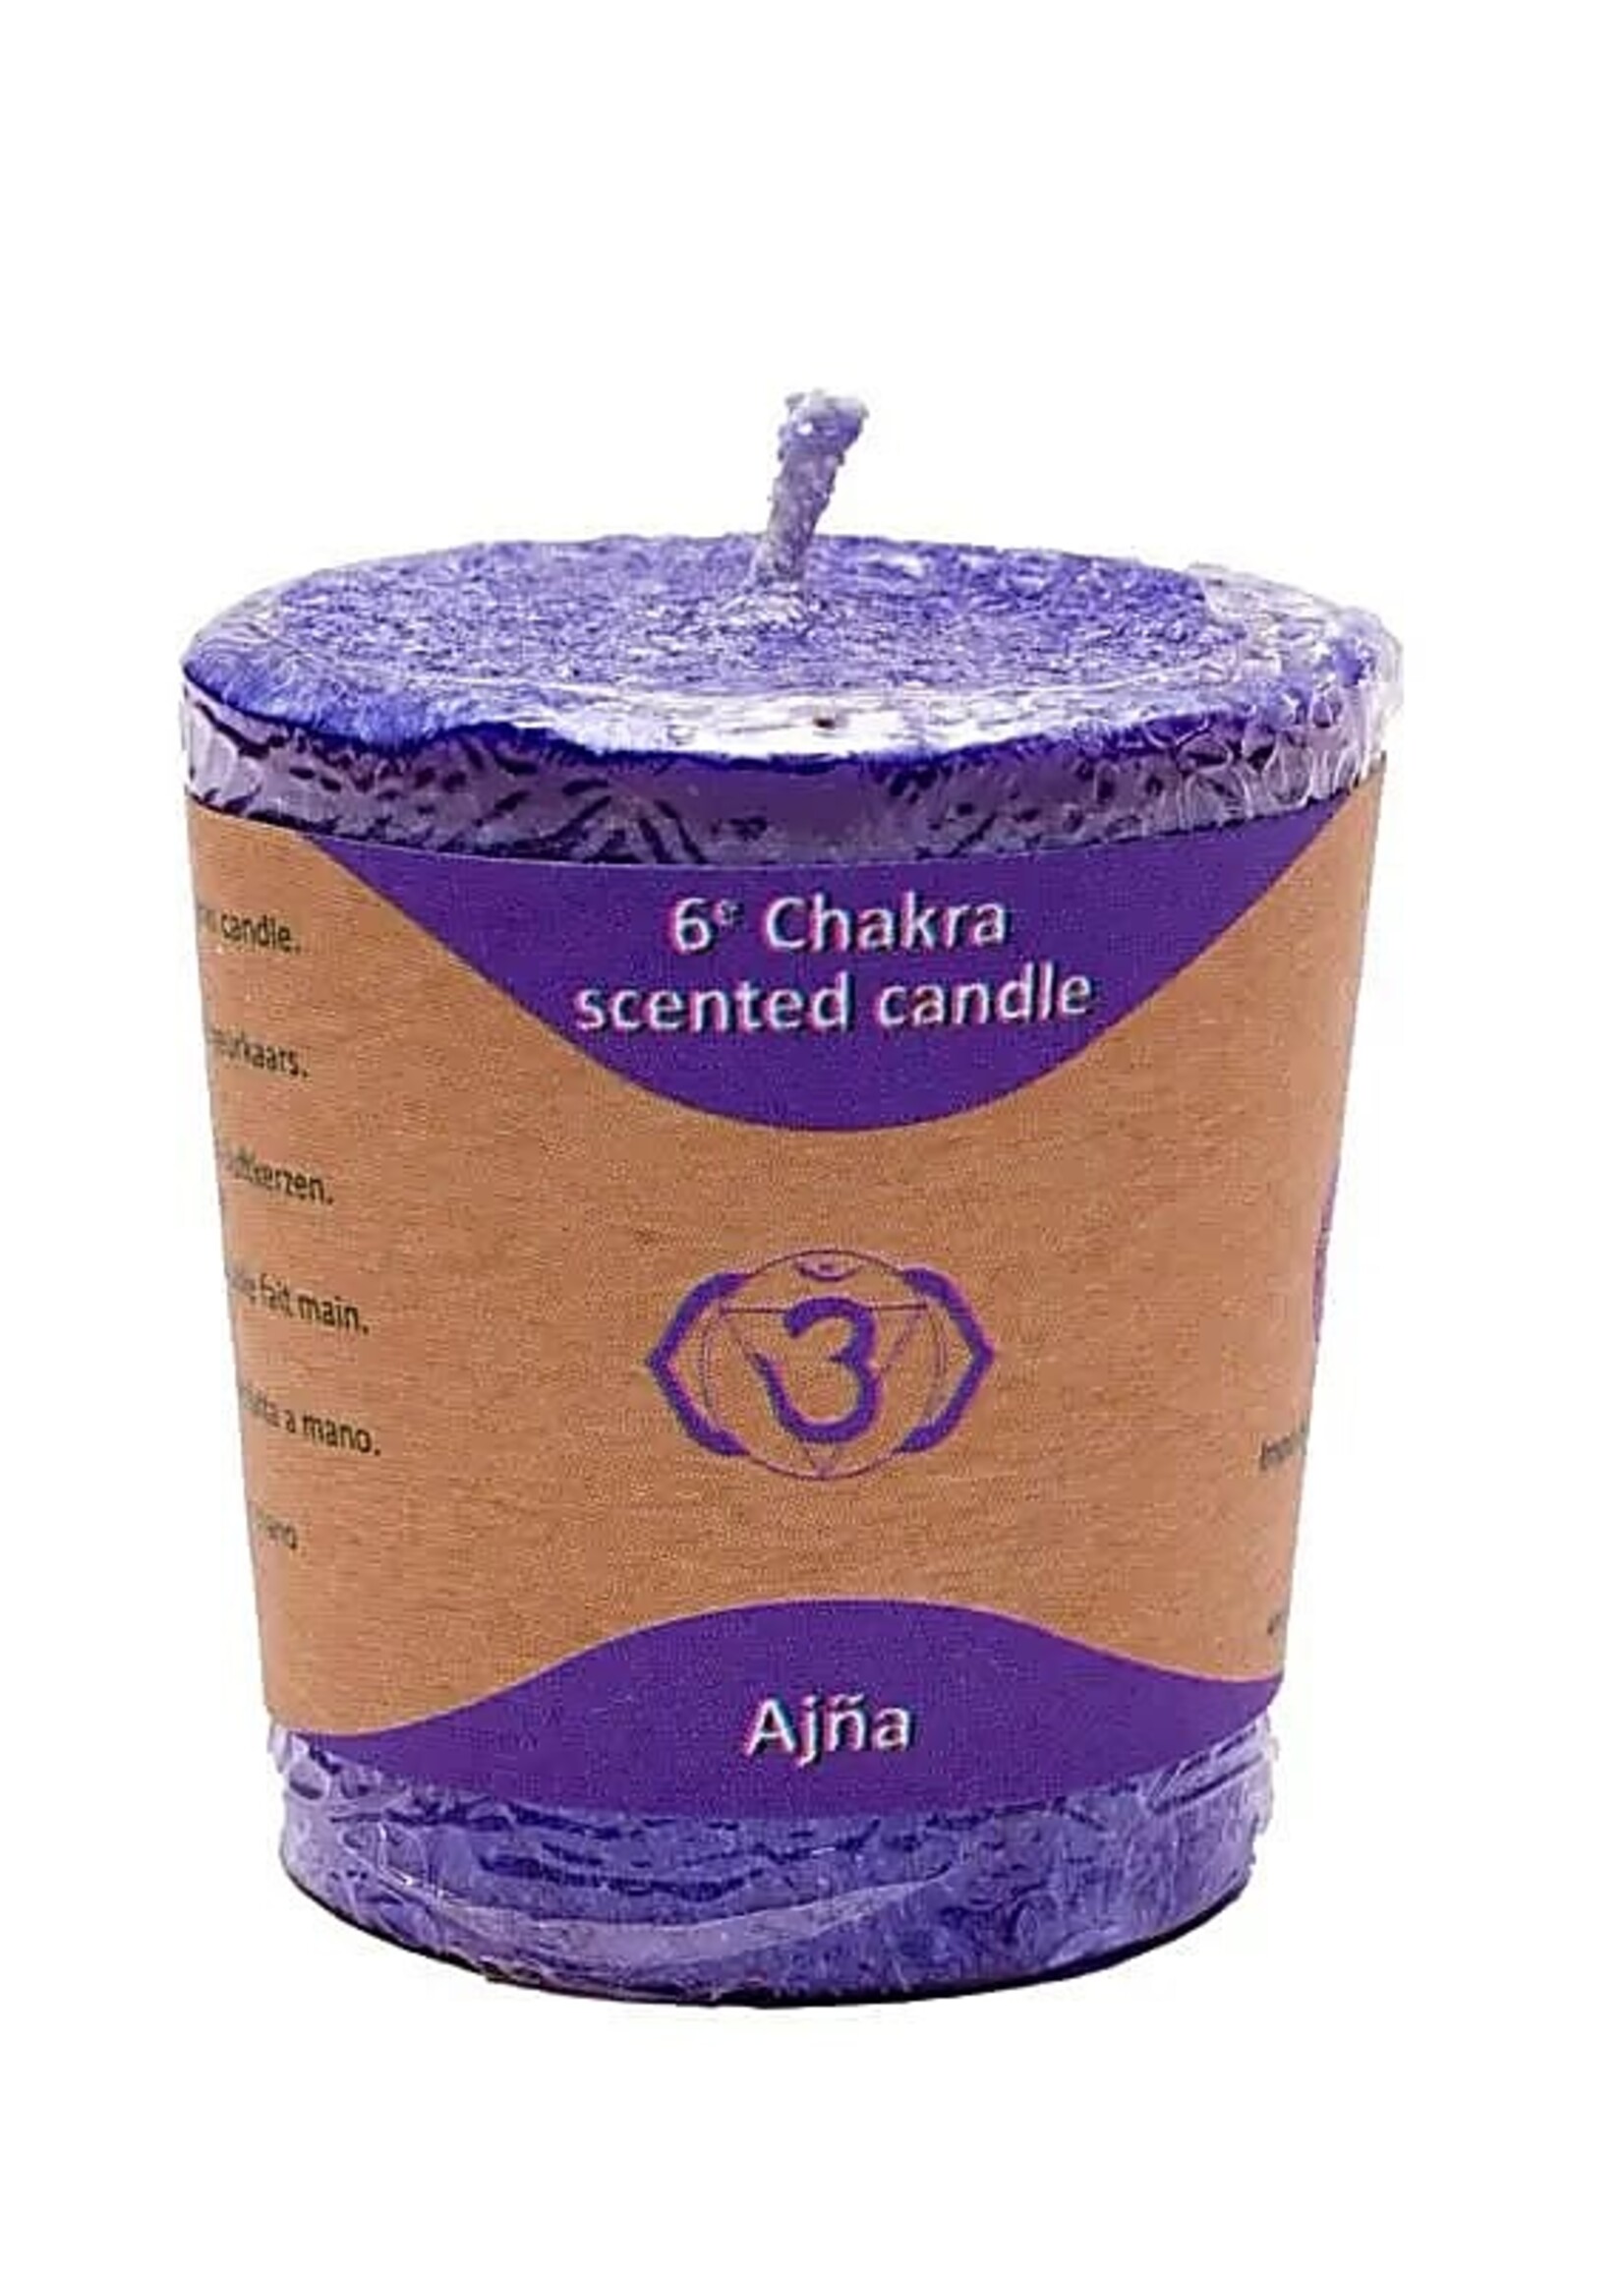 Scented candle votive chakra